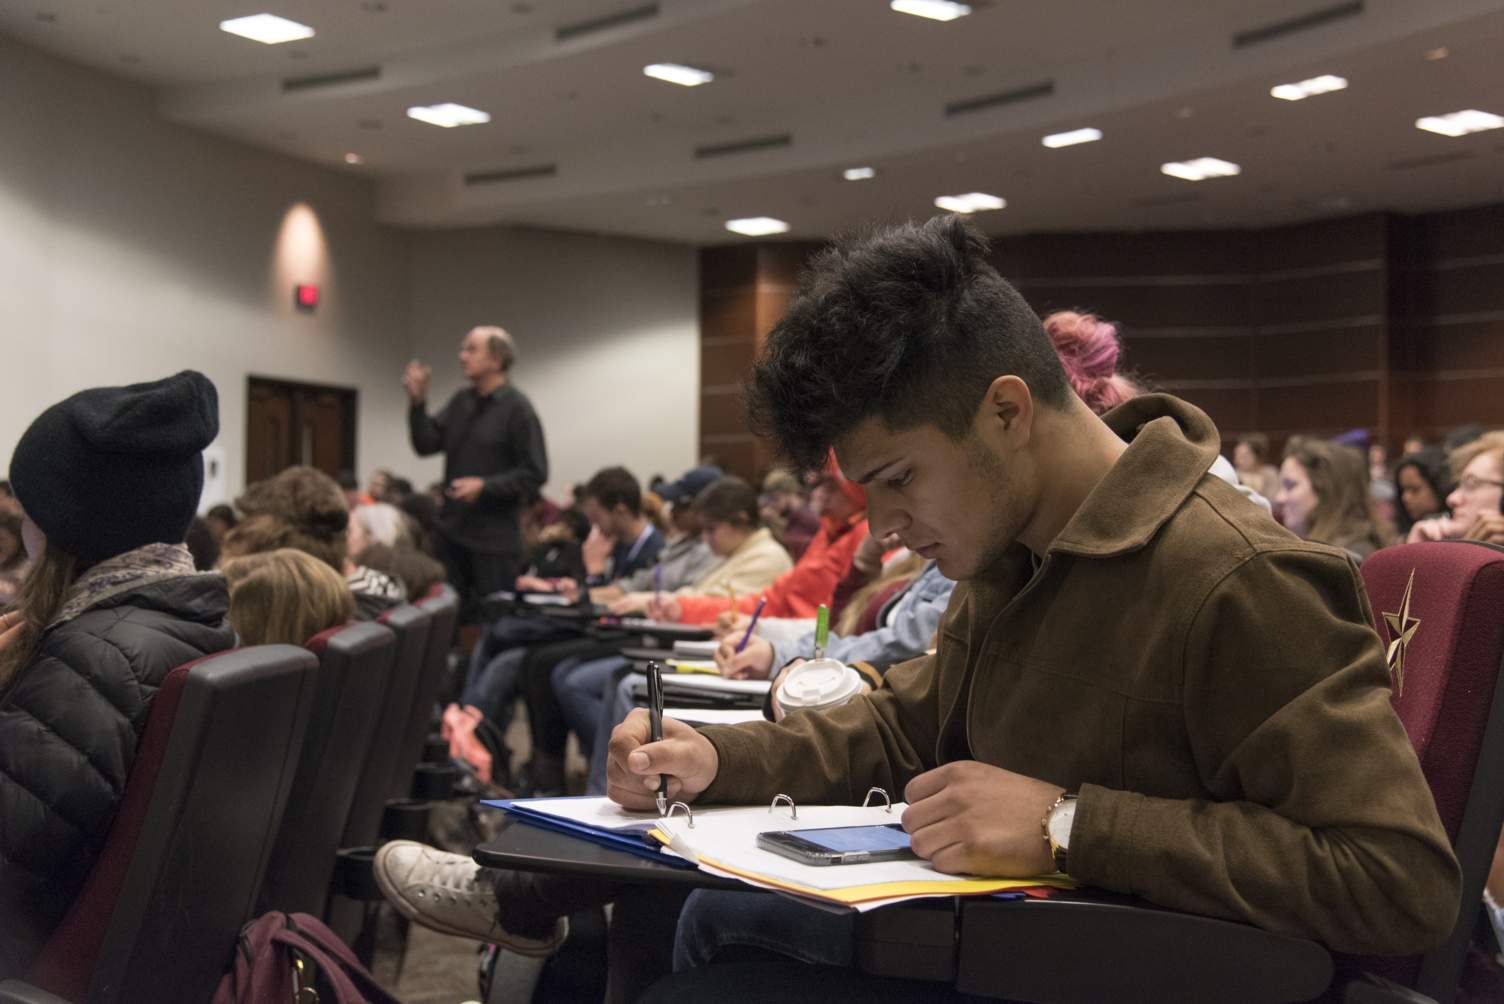 A hispanic student takes notes at a lecture in the Alkek Teaching Theatre.